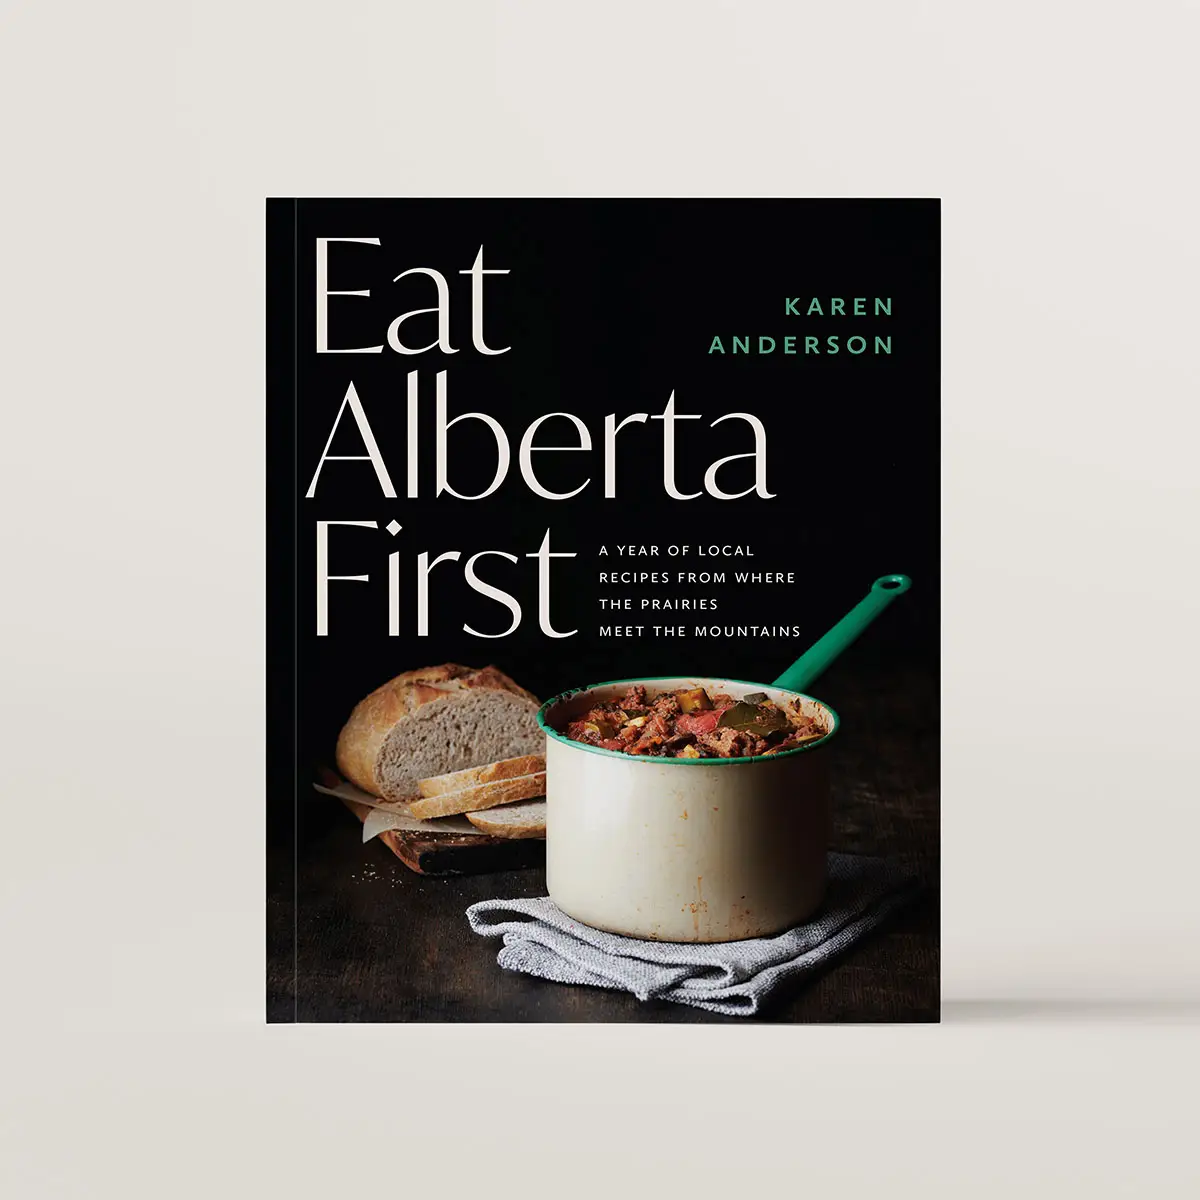 Book cover of Eat Alberta First. The cover features a dark photo of a stew in a pot with a sourdough loaf beside it. 